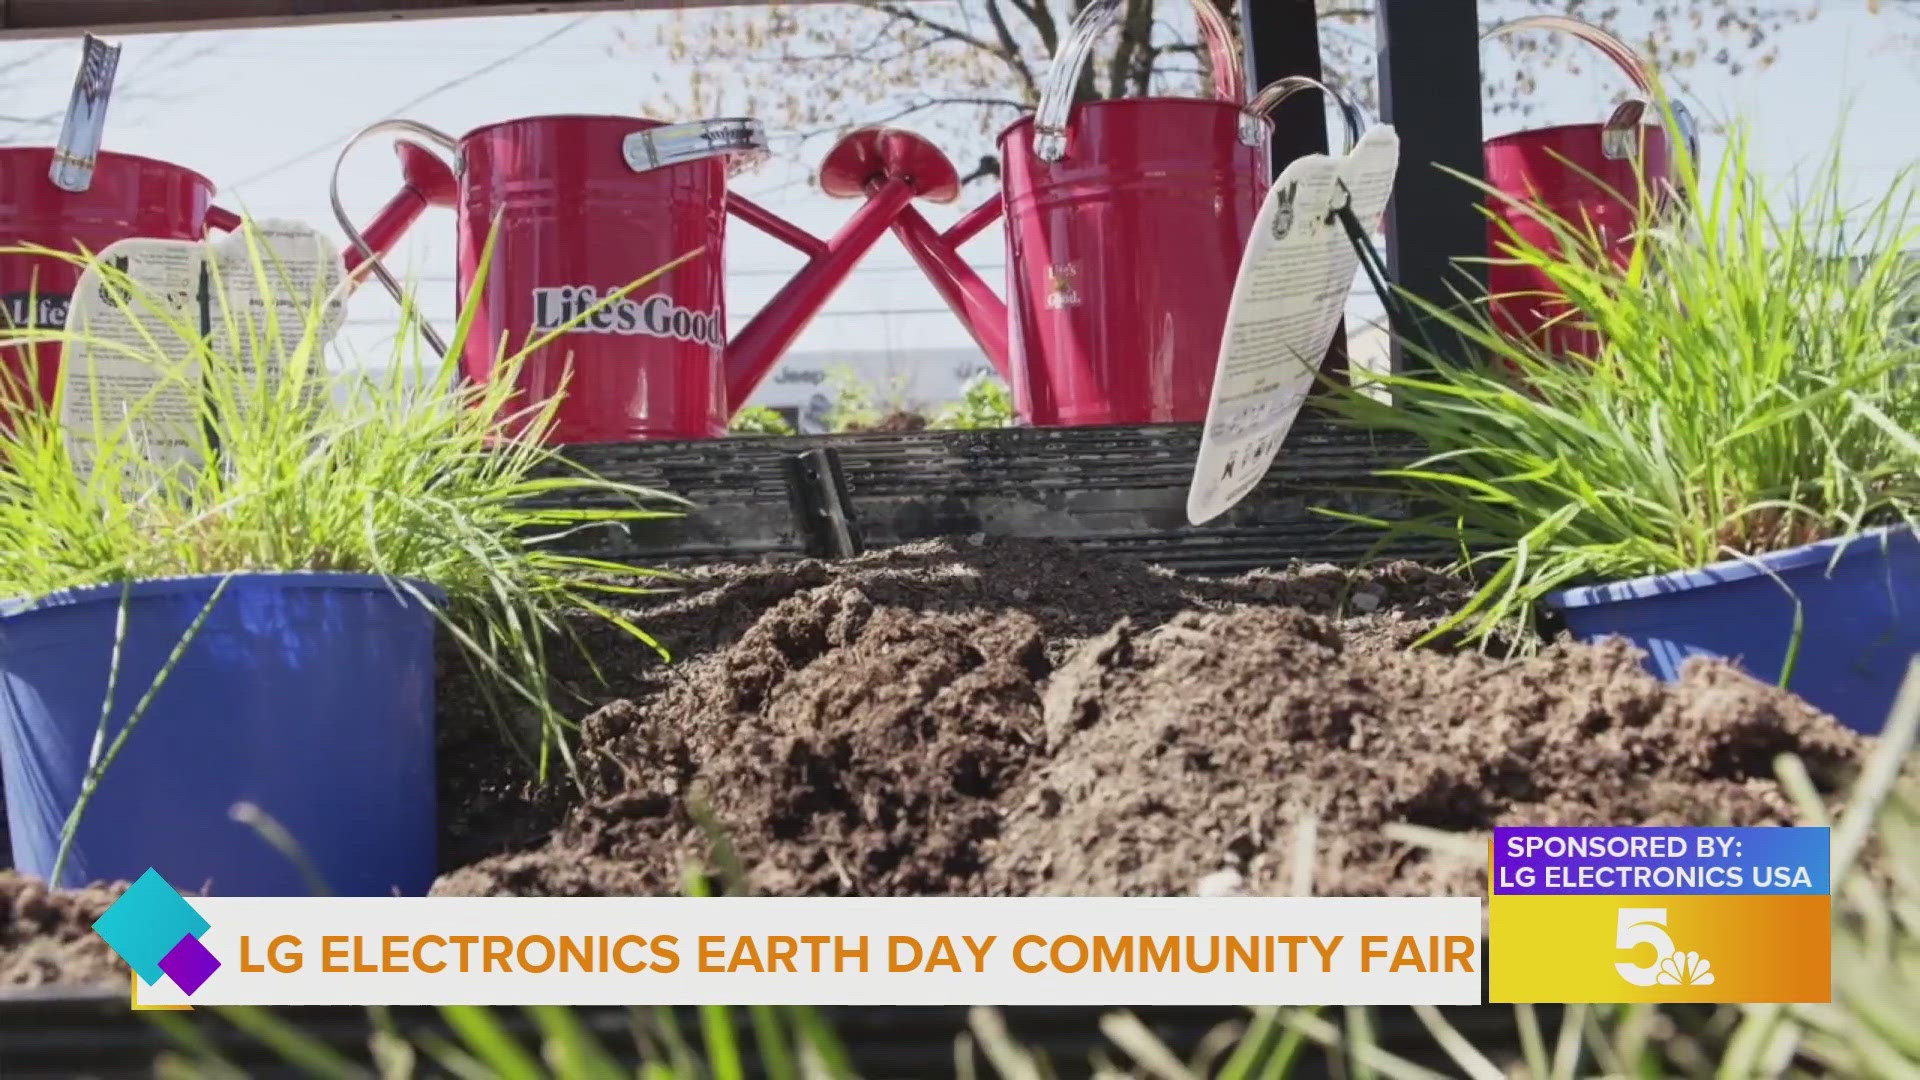 A look at this year's community fair to showcase LG's commitment to bettering the planet and making "Life Good" for all.